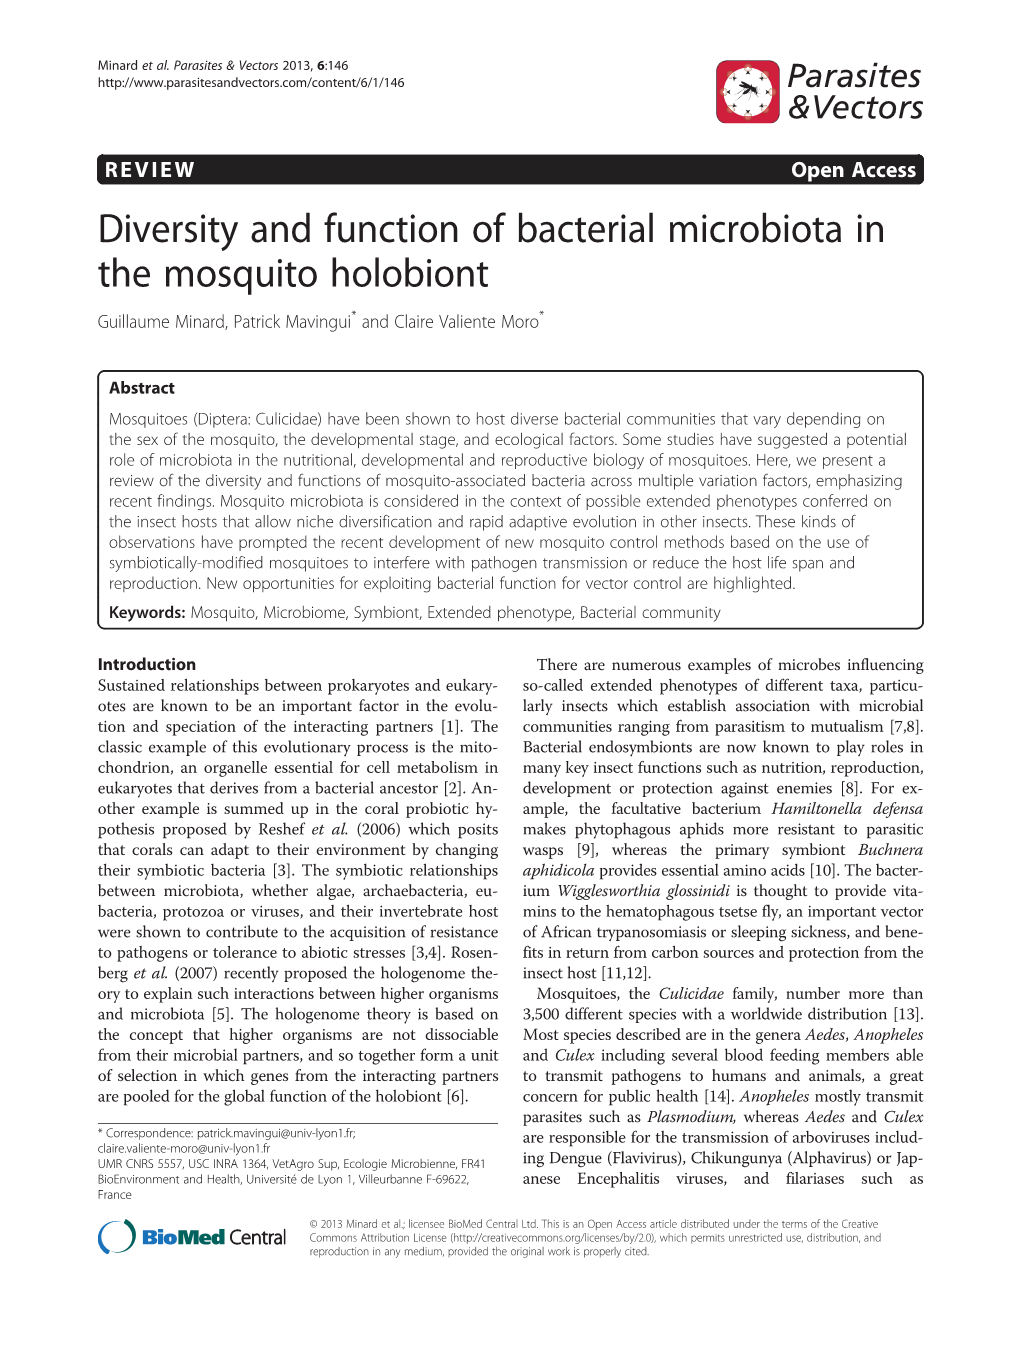 Diversity and Function of Bacterial Microbiota in the Mosquito Holobiont Guillaume Minard, Patrick Mavingui* and Claire Valiente Moro*